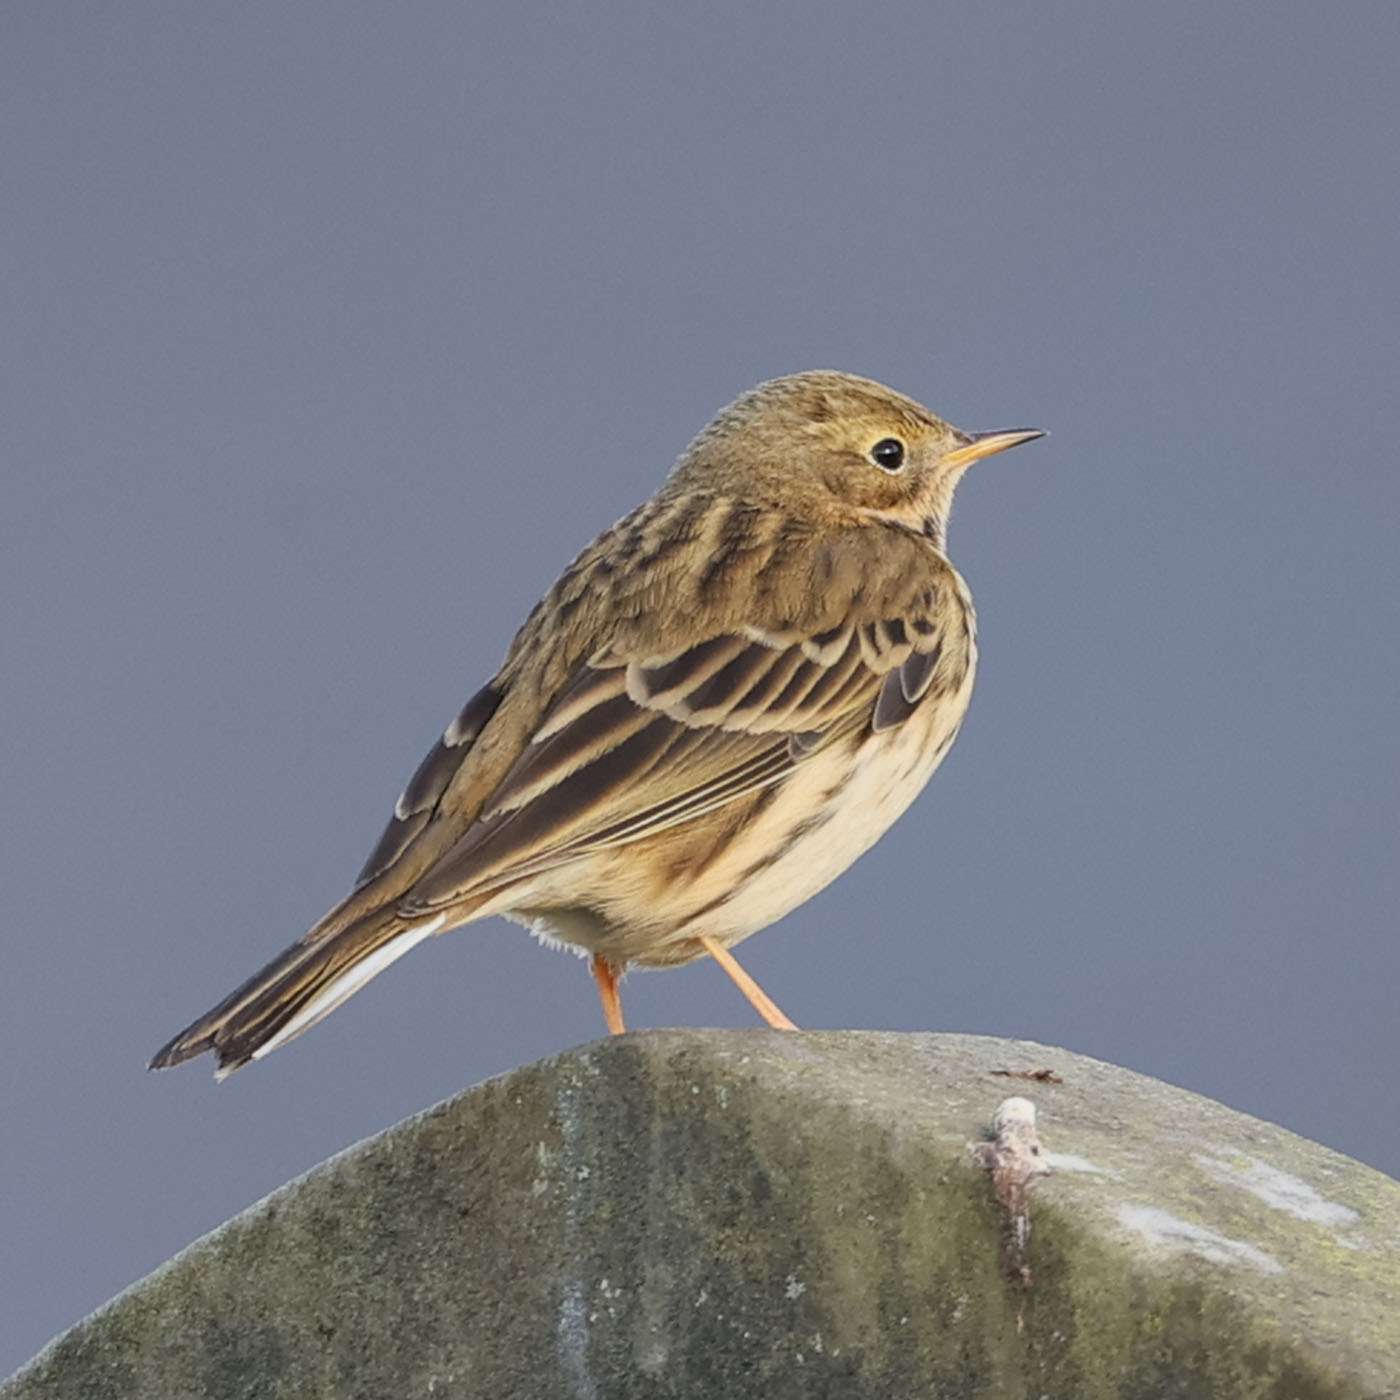 Meadow Pipit by Steve Hopper at Ford Park